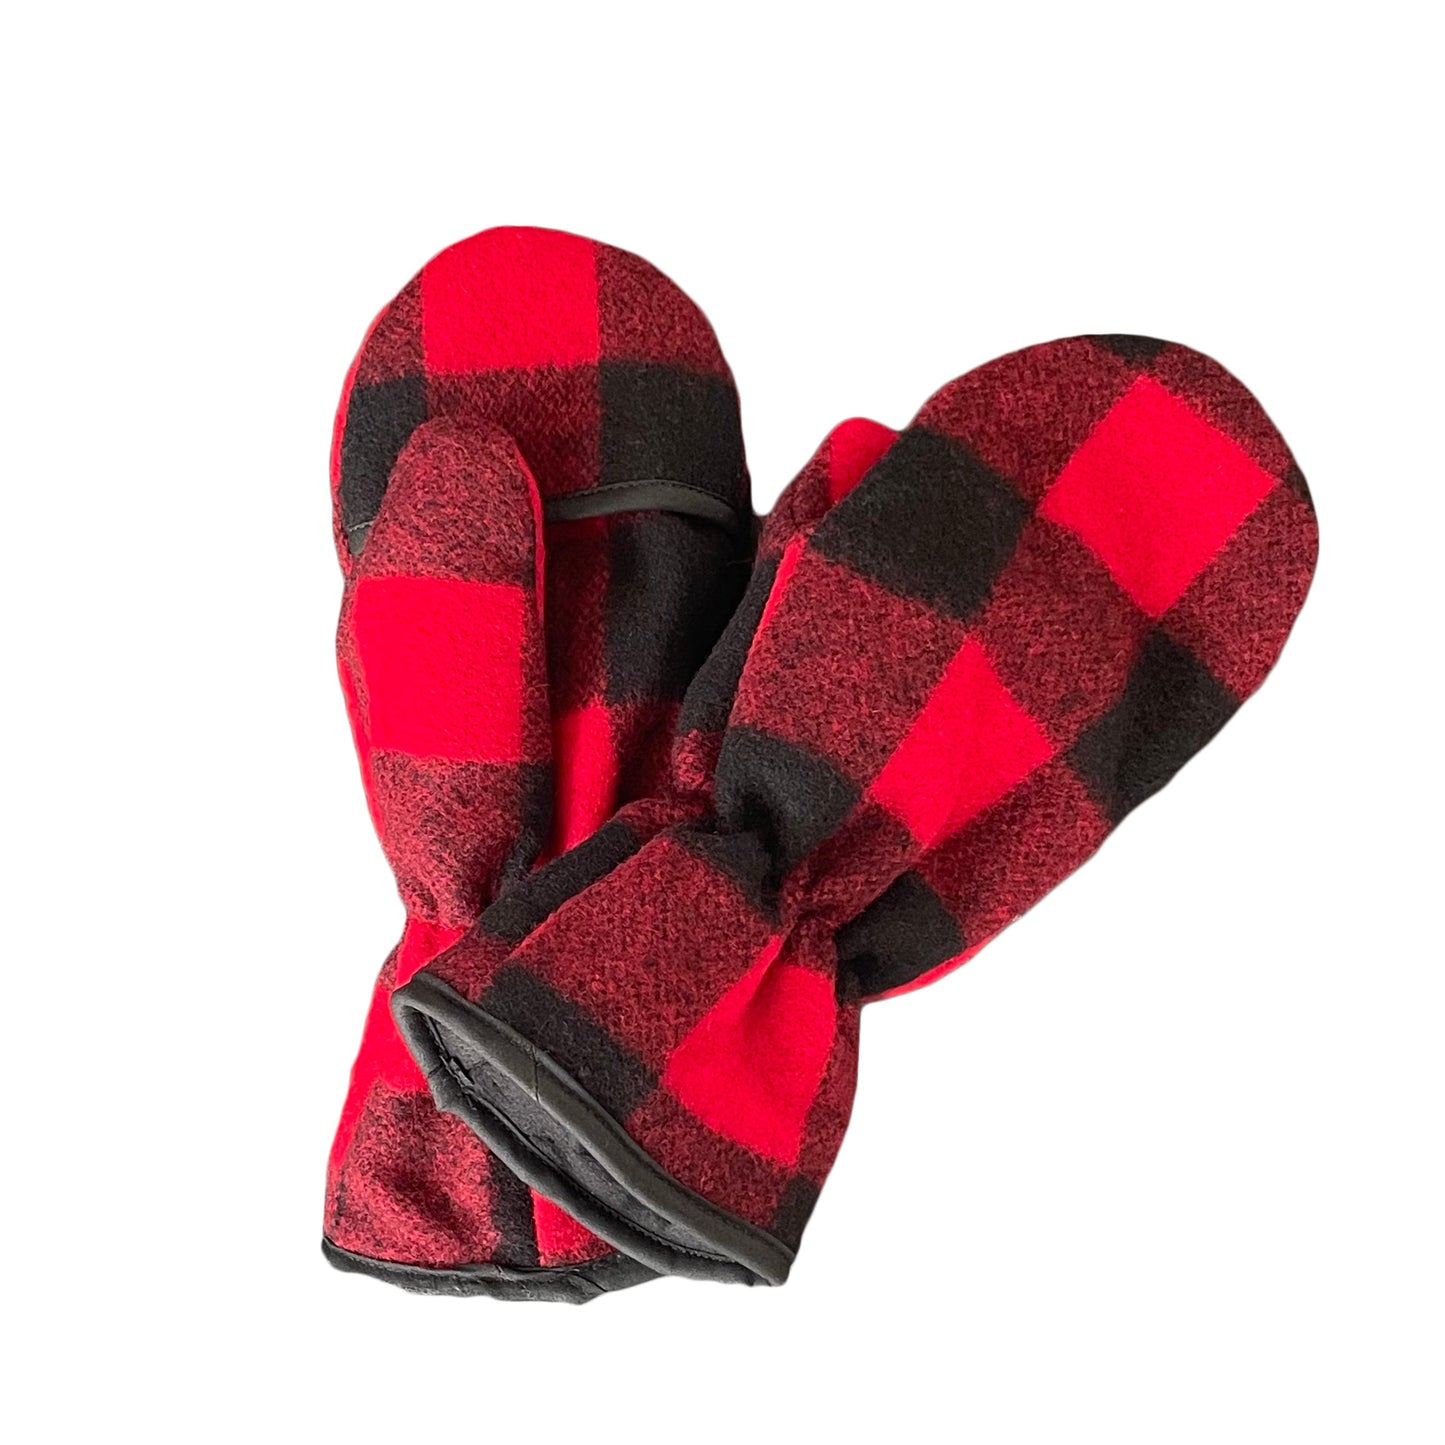 Johnson Woolen Mills red and black large stag hunter mittens 